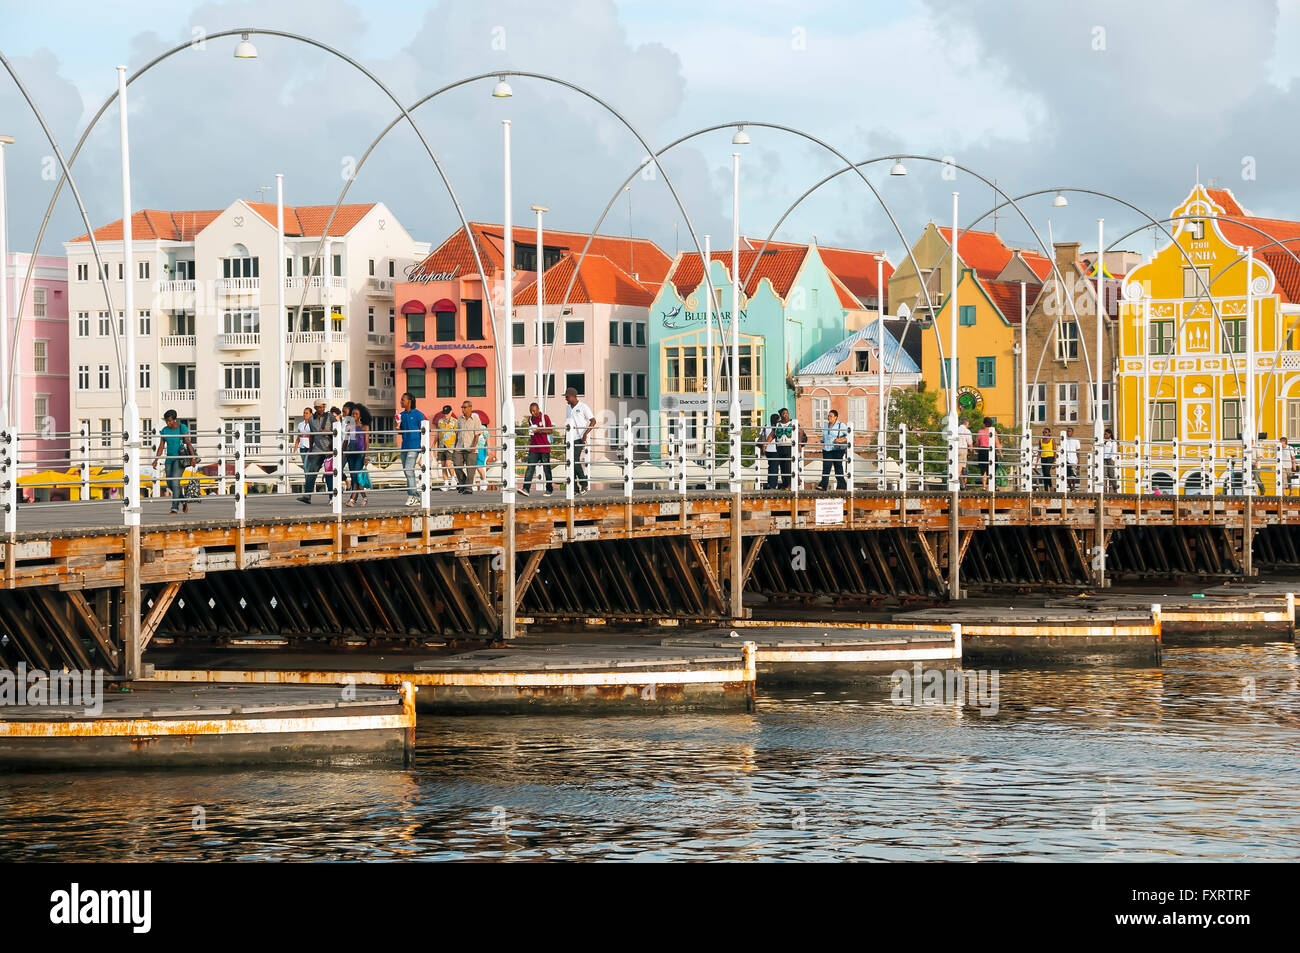 Queen Emma Bridge is a floating pontoon pedestrian bridge joining the Pinda and Otrabanda sides of Willemstad Curacao Stock Photo